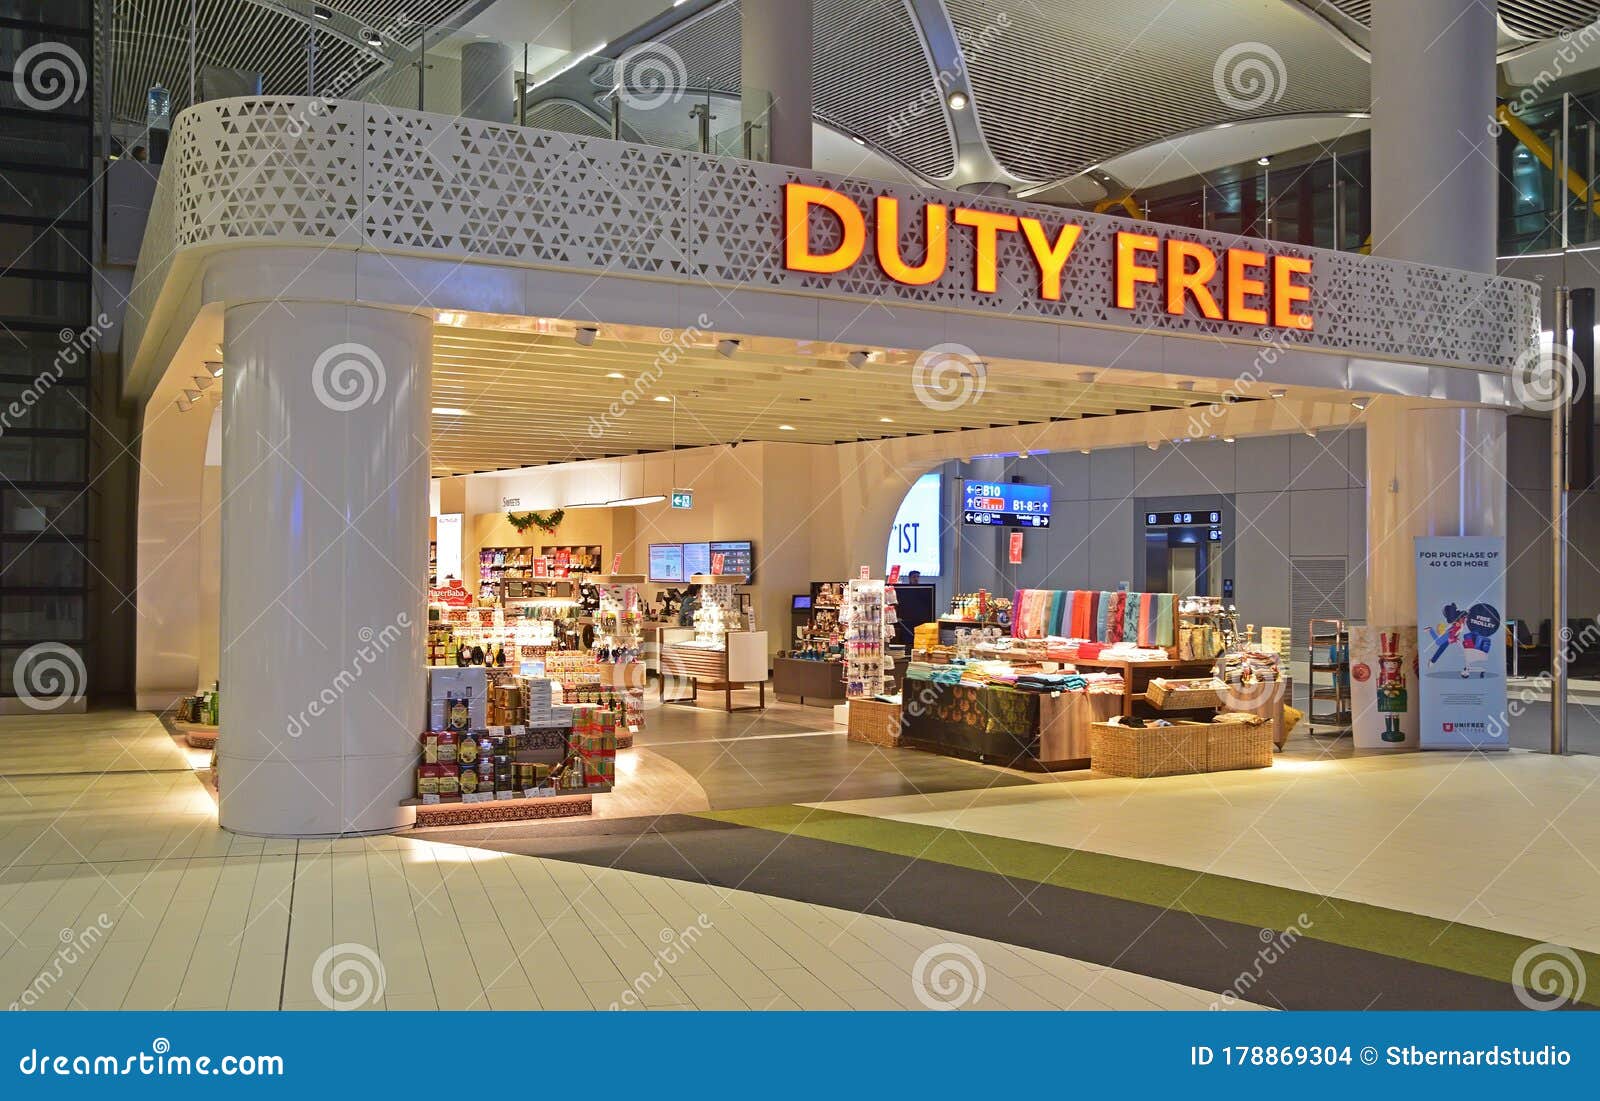 unifree duty free shop in the shining new building of istanbul airport editorial stock image image of interior ceased 178869304